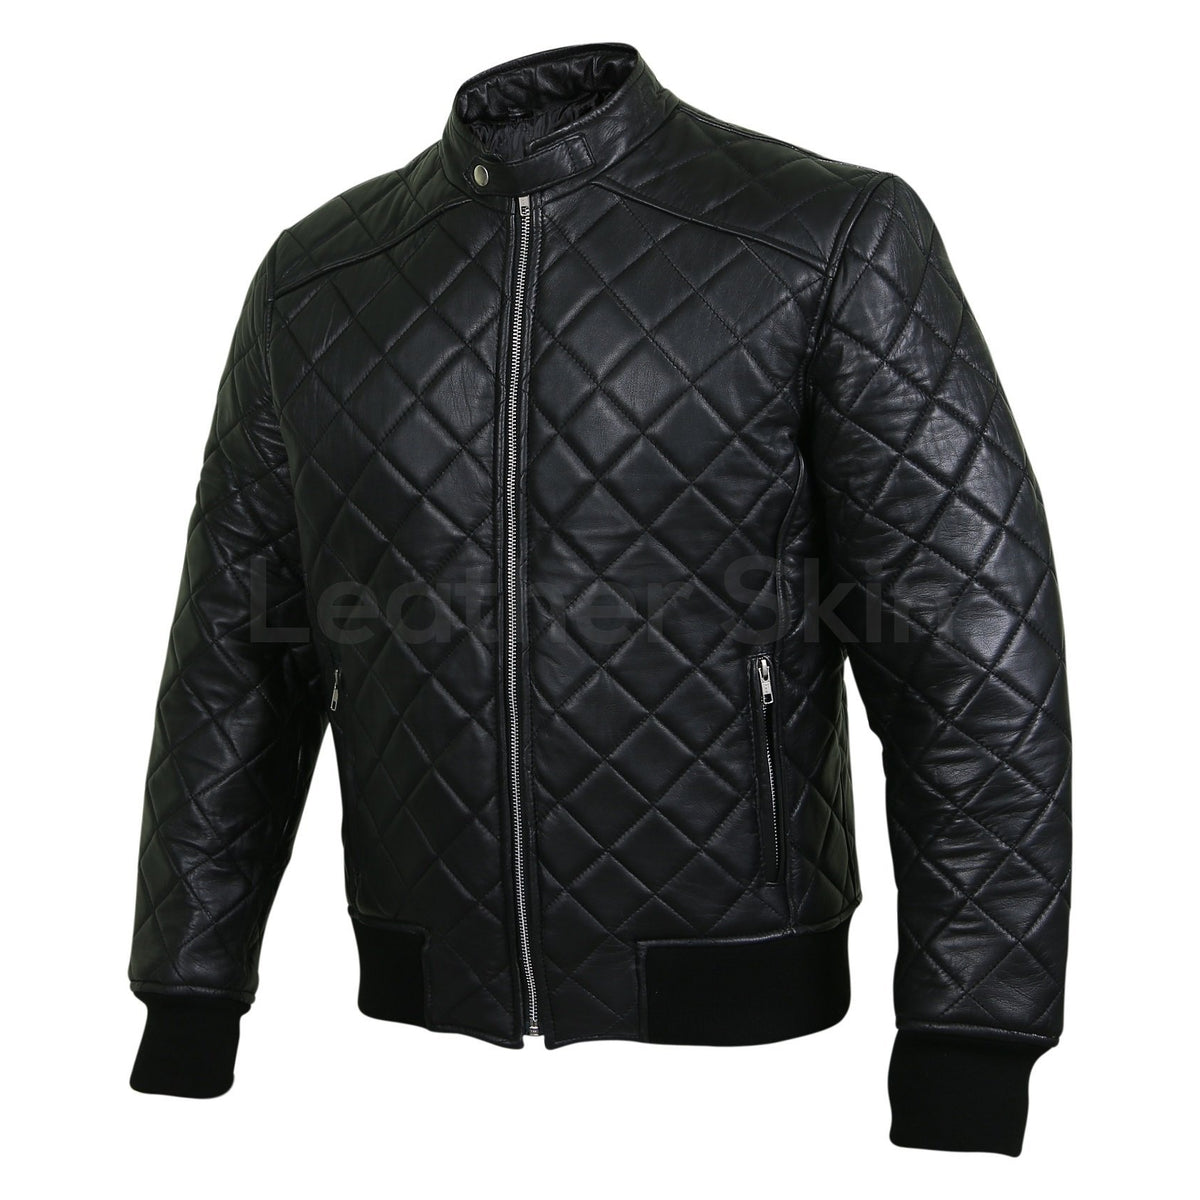 Leather Jackets for Men | Mens Leather Jackets Page 2 - Leather Skin Shop